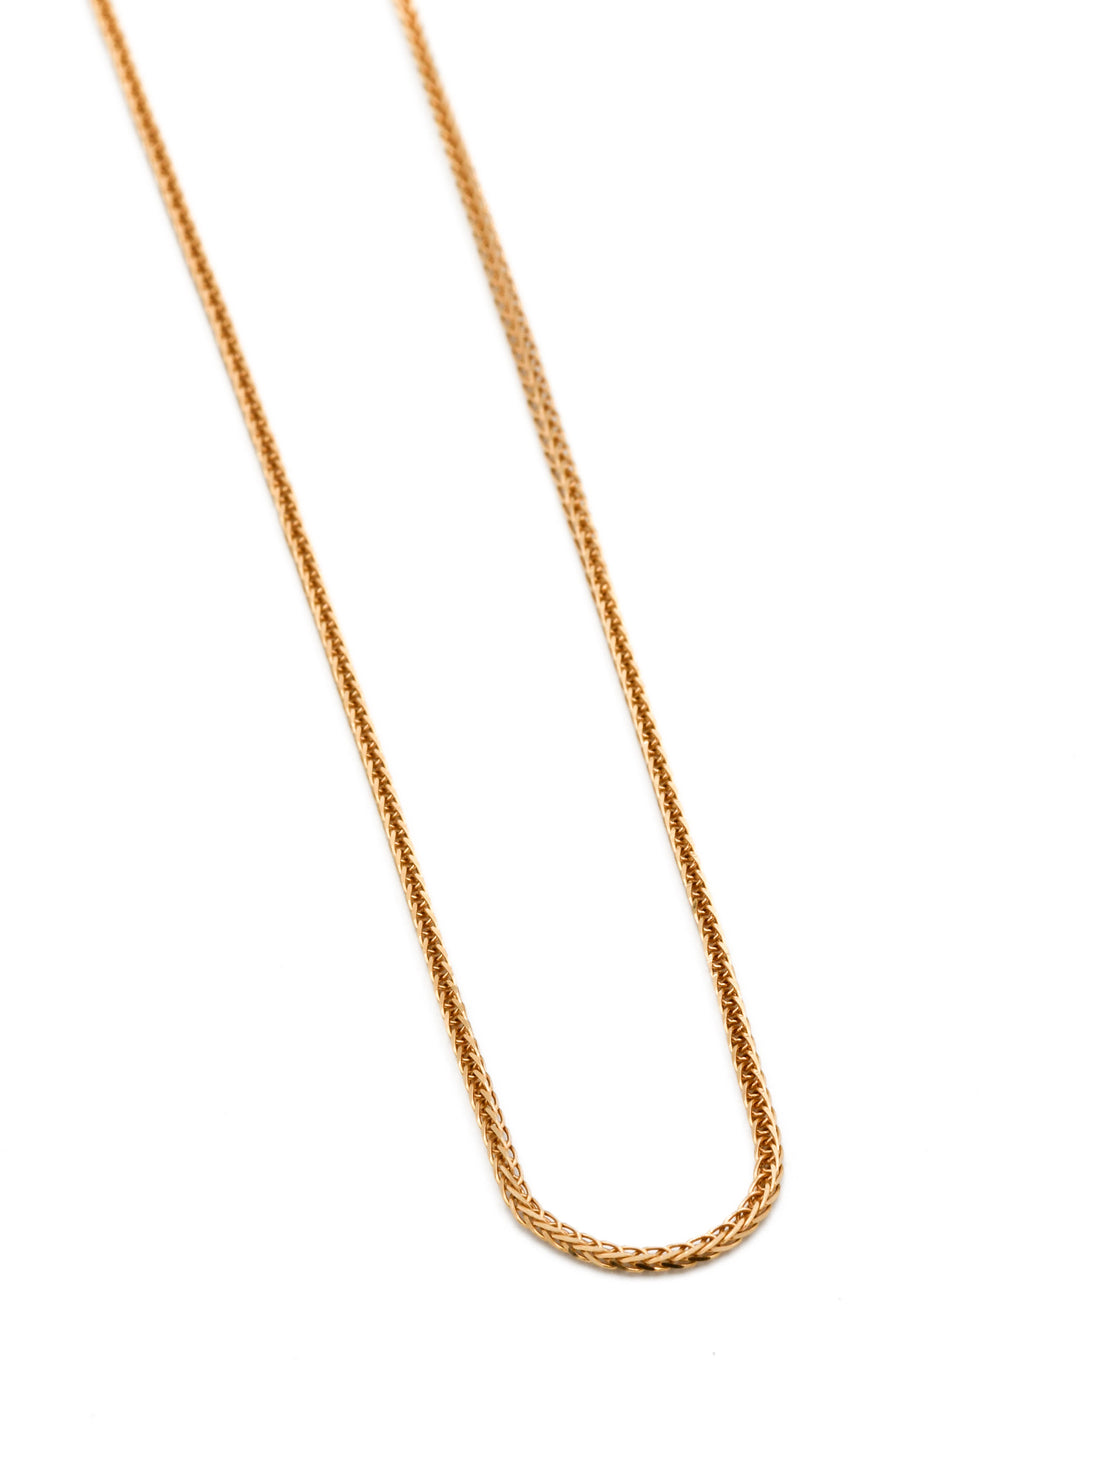 22ct Rose Gold Chain - Roop Darshan